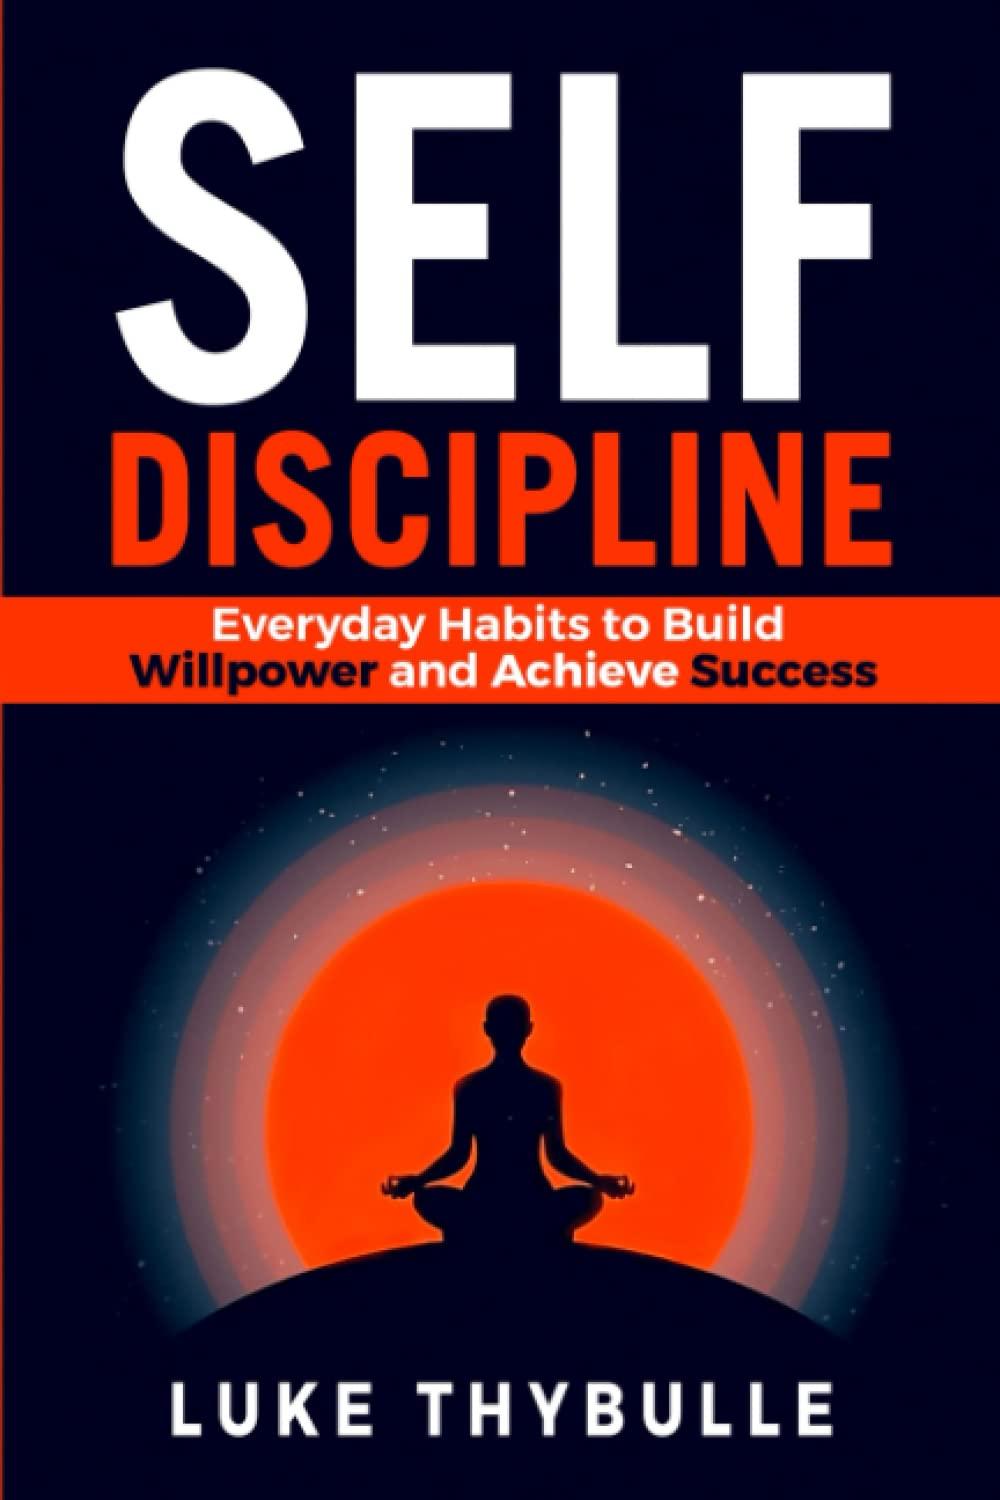 self-discipline everyday habits to build willpower and achieve success 1st edition luke thybulle b0c5p5l95f,